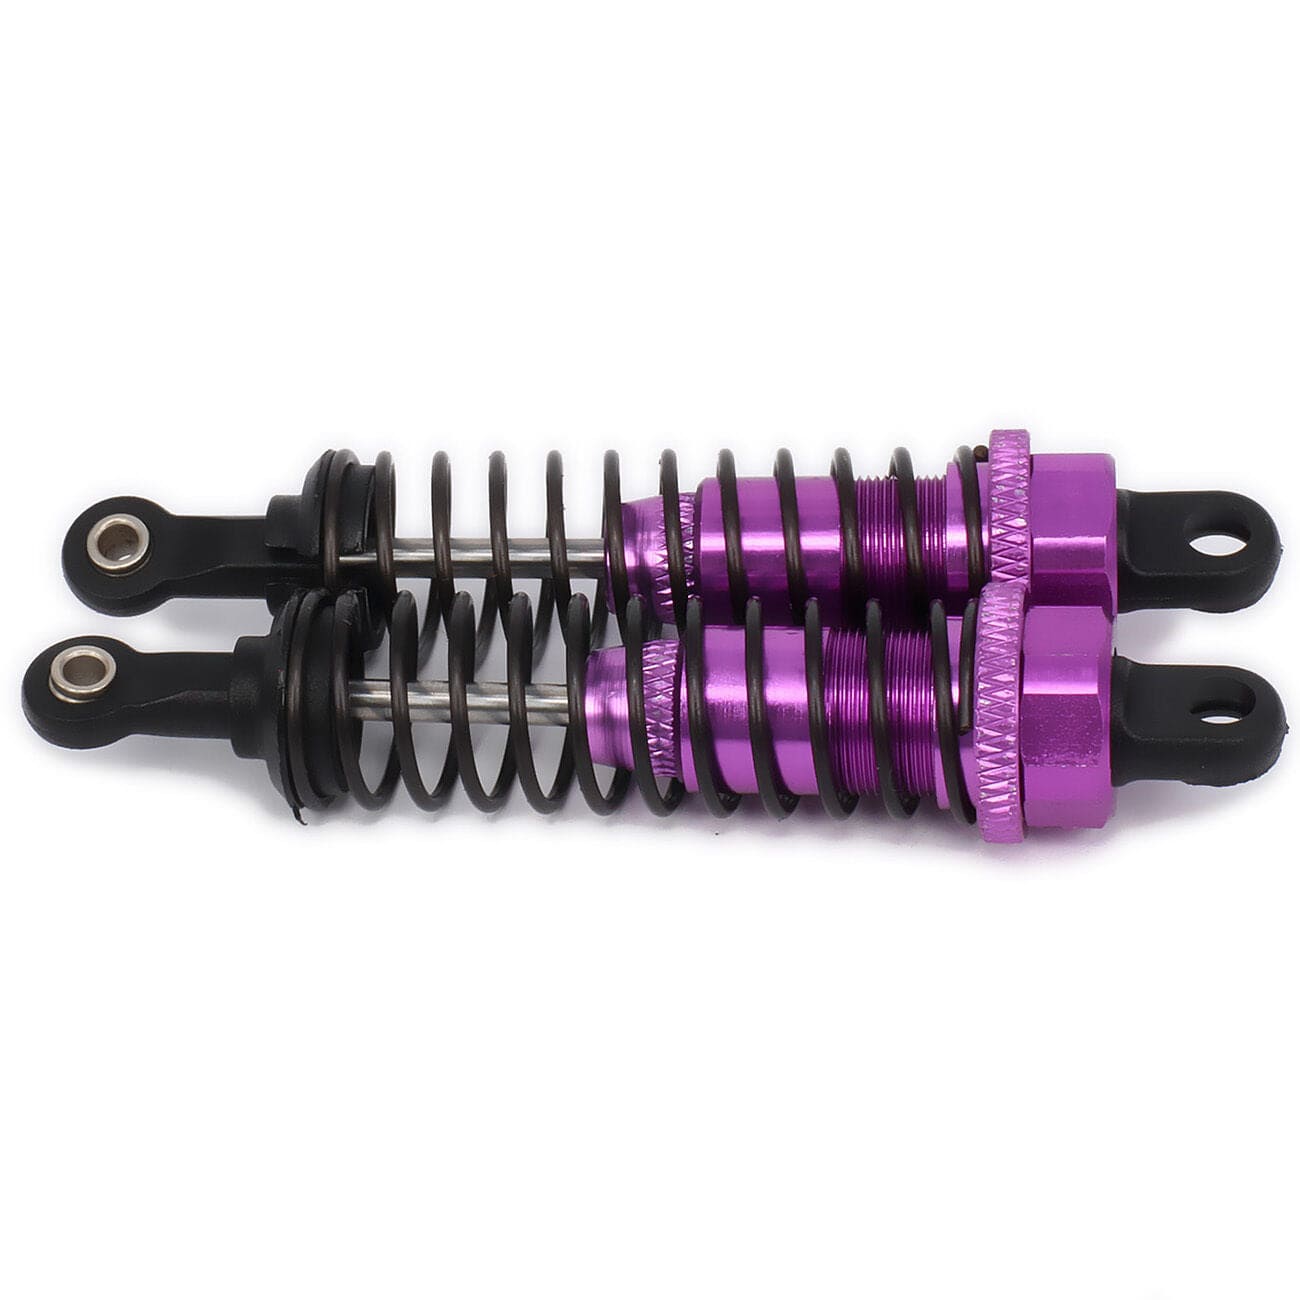 RCAWD RC CAR UPGRADE PARTS Purple RCAWD 70mm Shock Absorber Damper Oil Adjustable 2PCS For Rc Car 1/16 Model Car